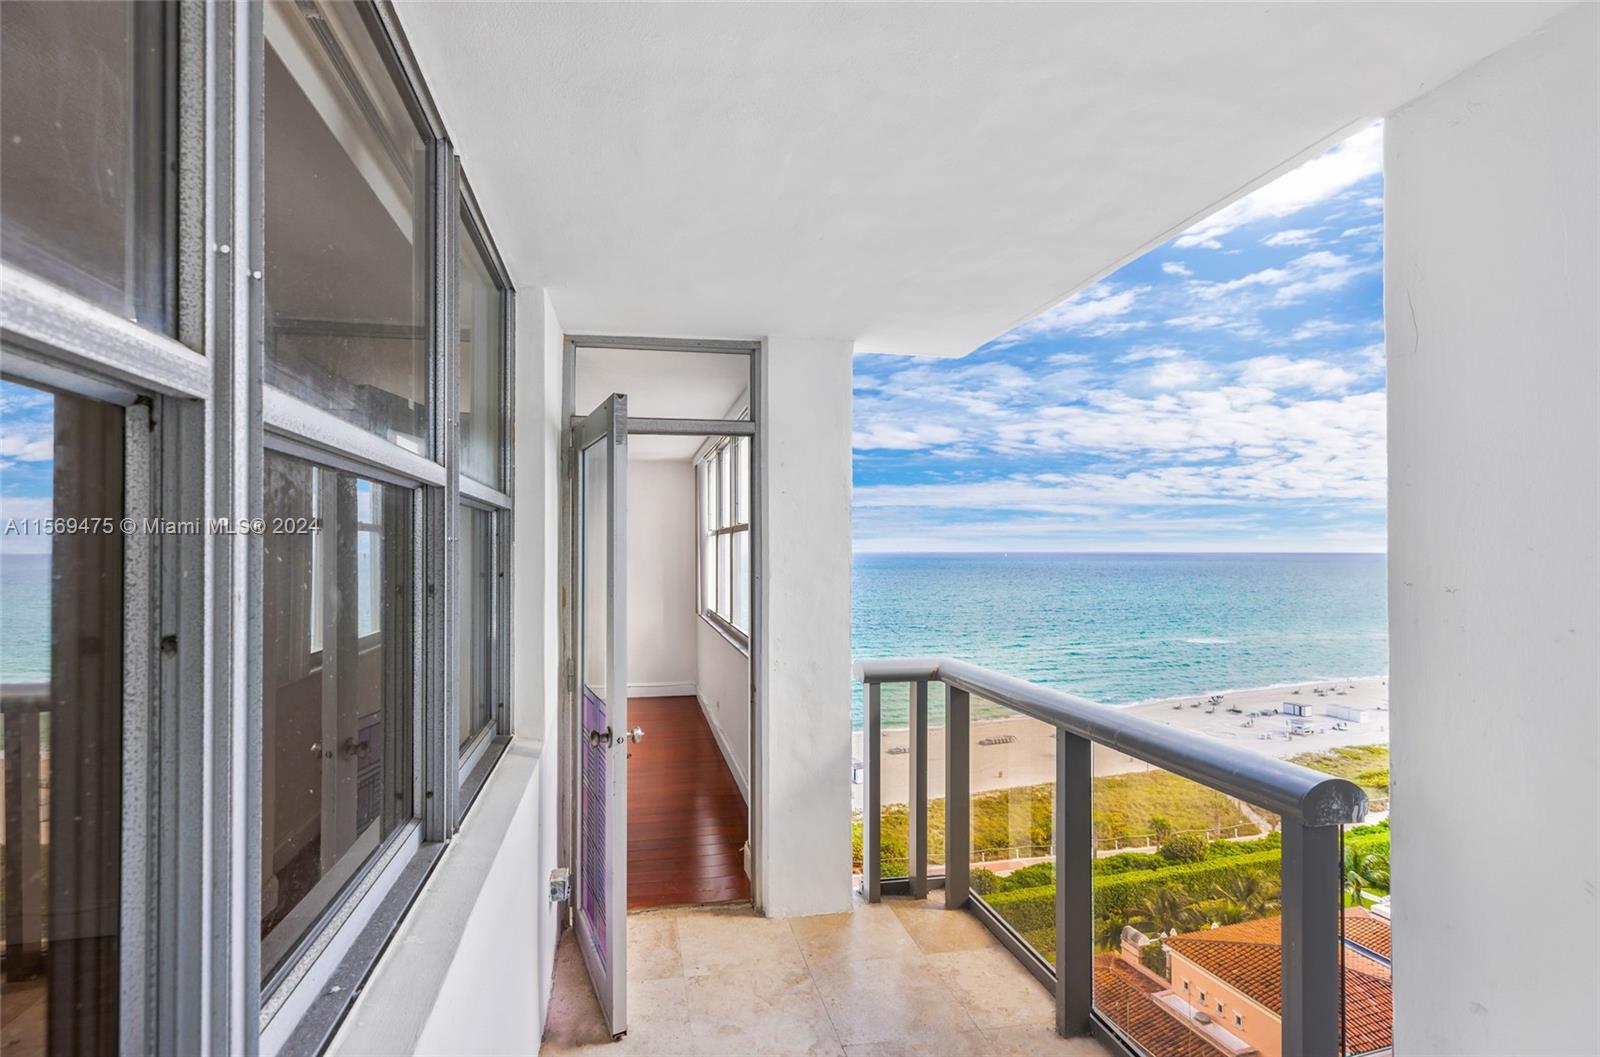 6039  Collins Ave #1622 For Sale A11569475, FL